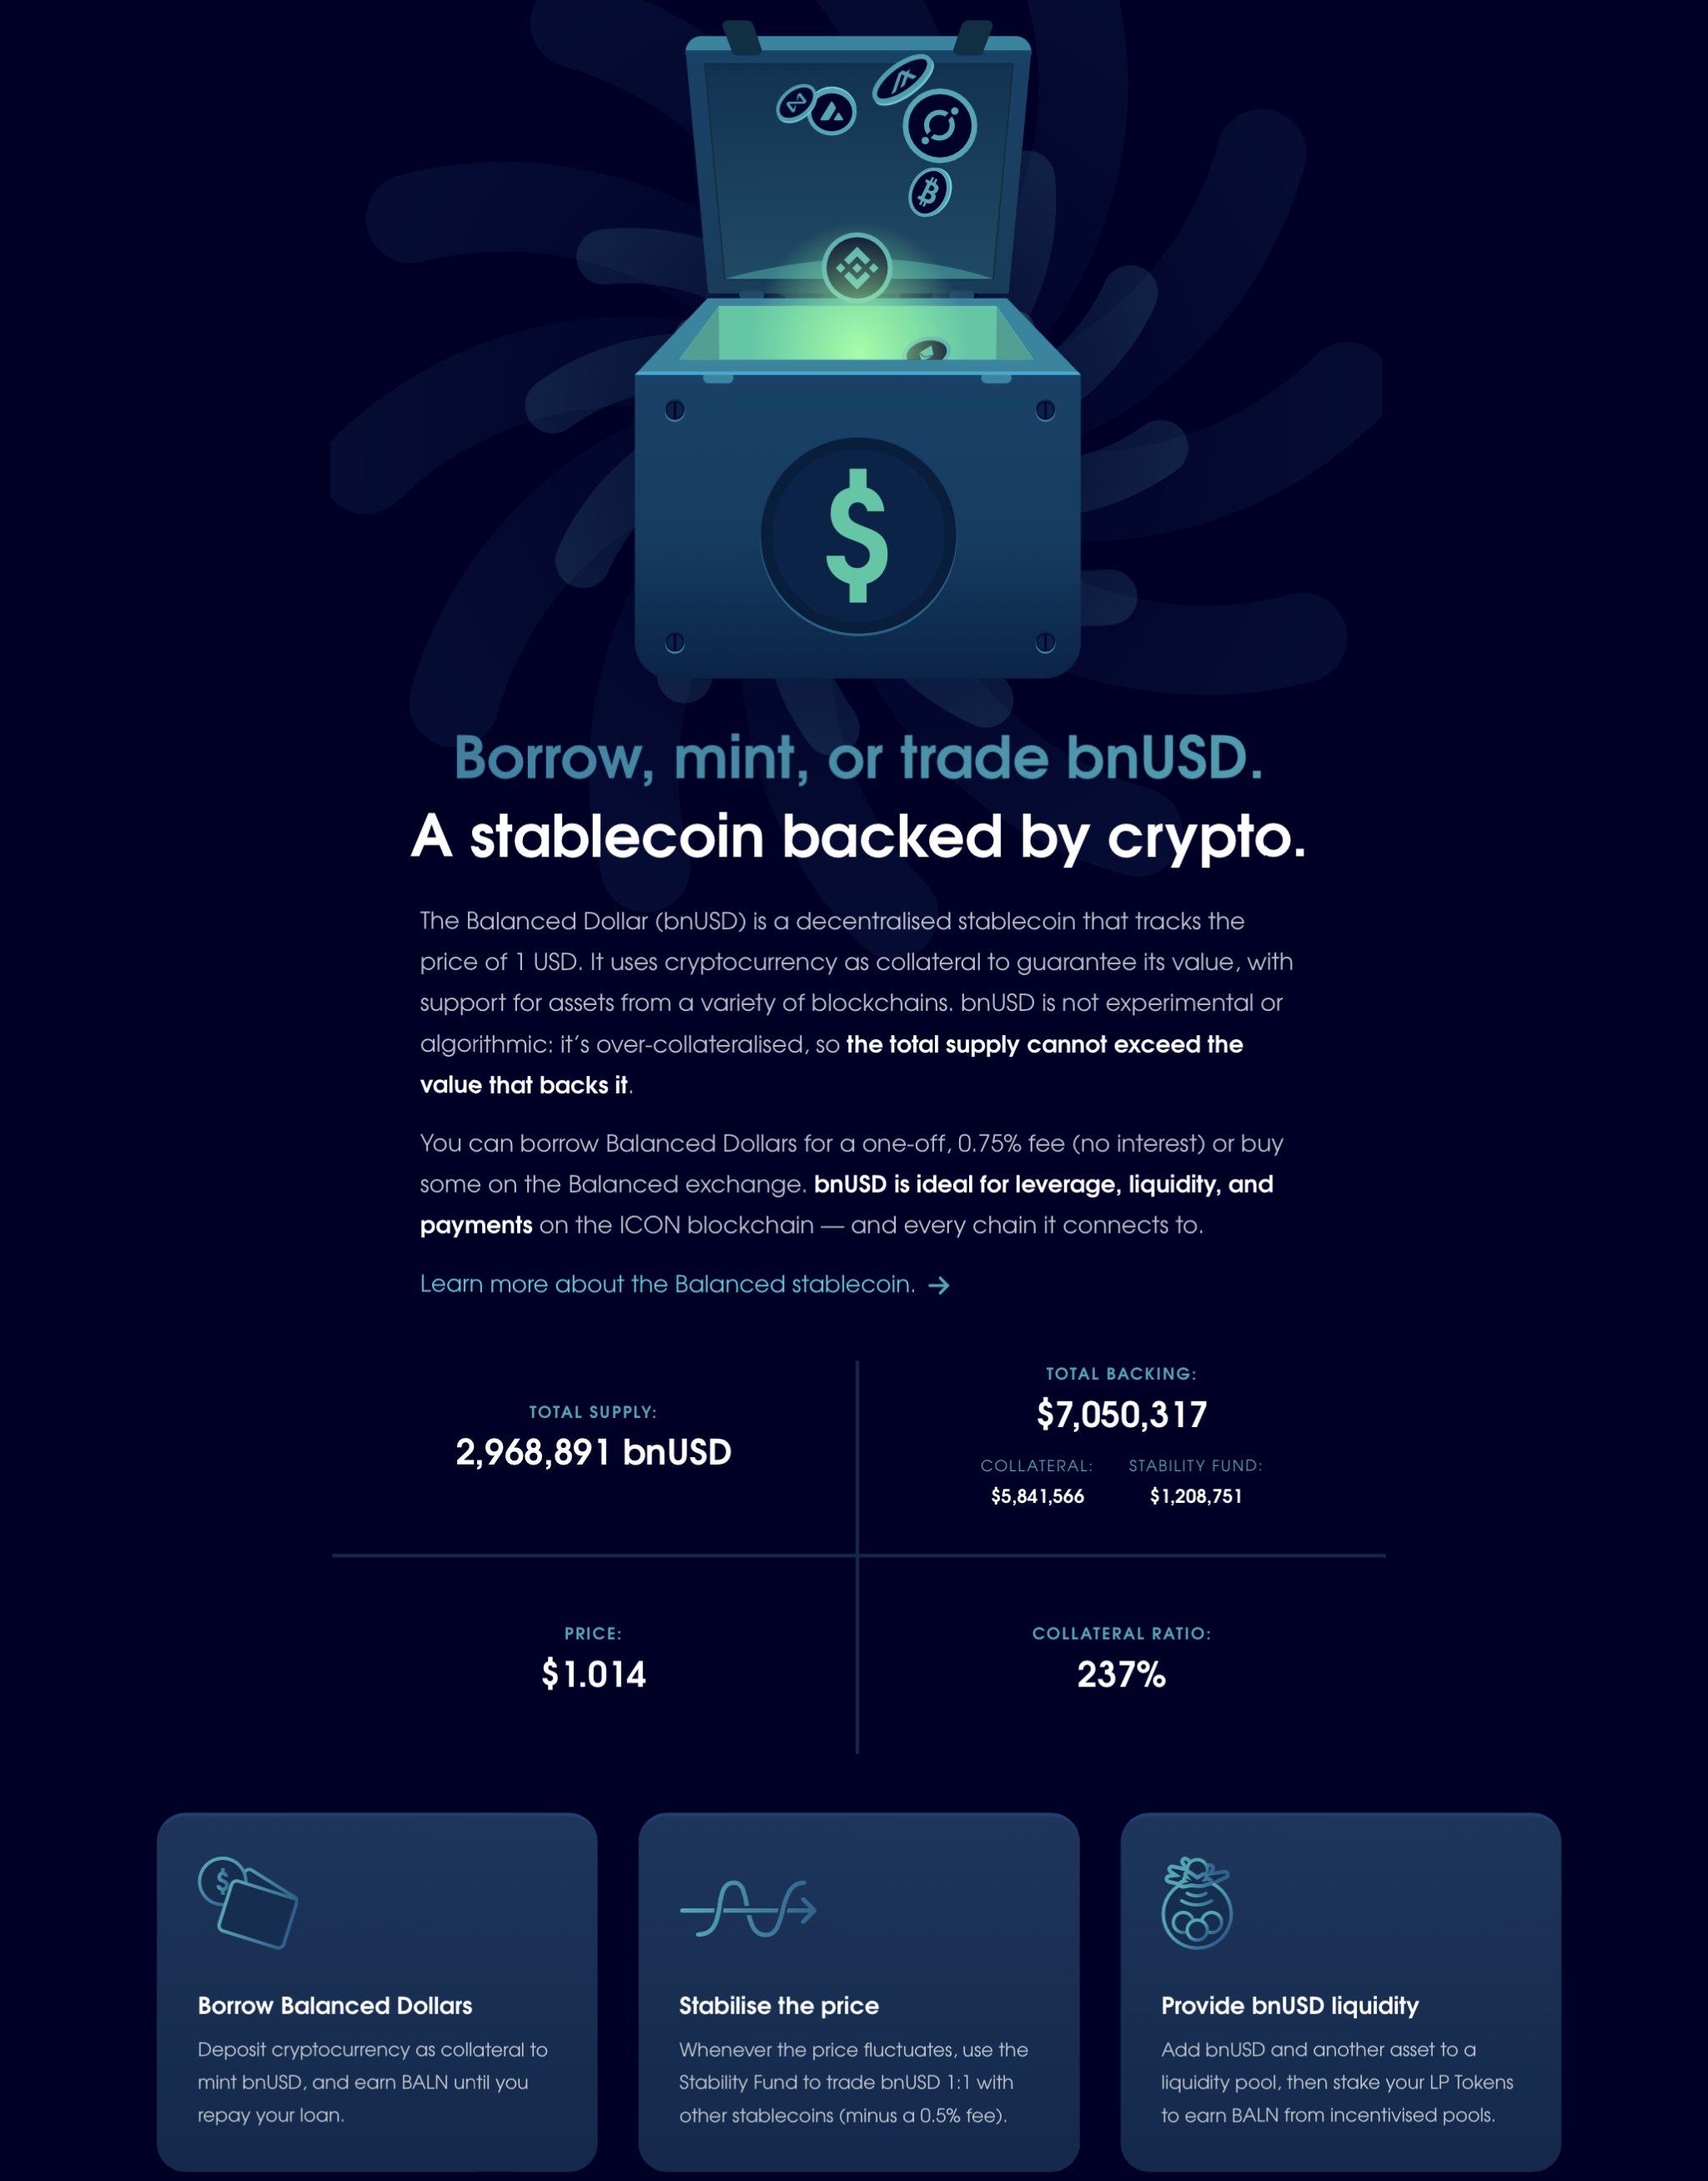 The stablecoin section on the new Balanced landing page.